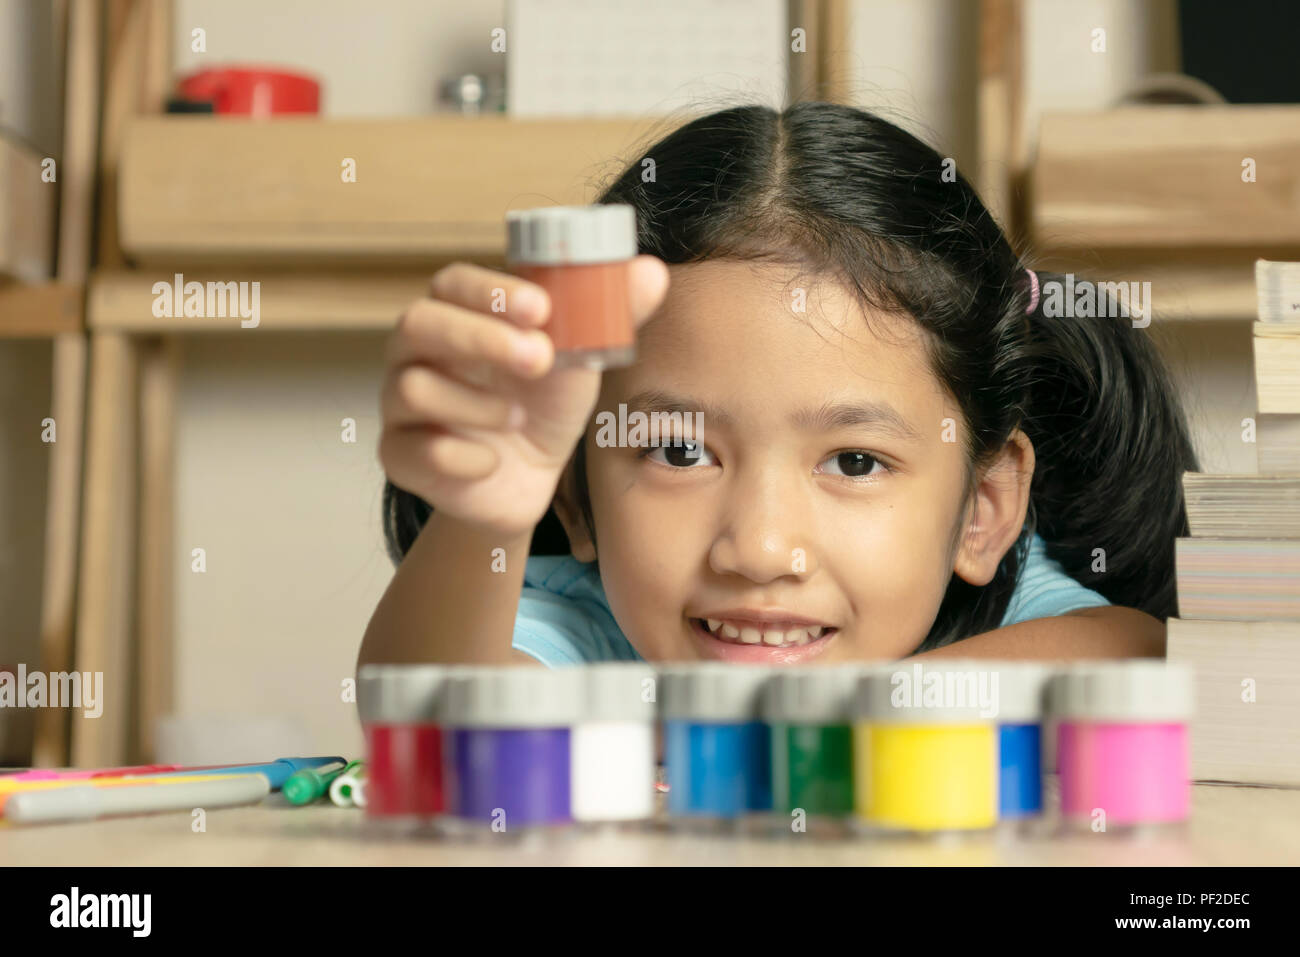 Little asian girl is showing a color and looking forward with smilling. Color group and book on the desk. Select focus shallow depth of field. Stock Photo